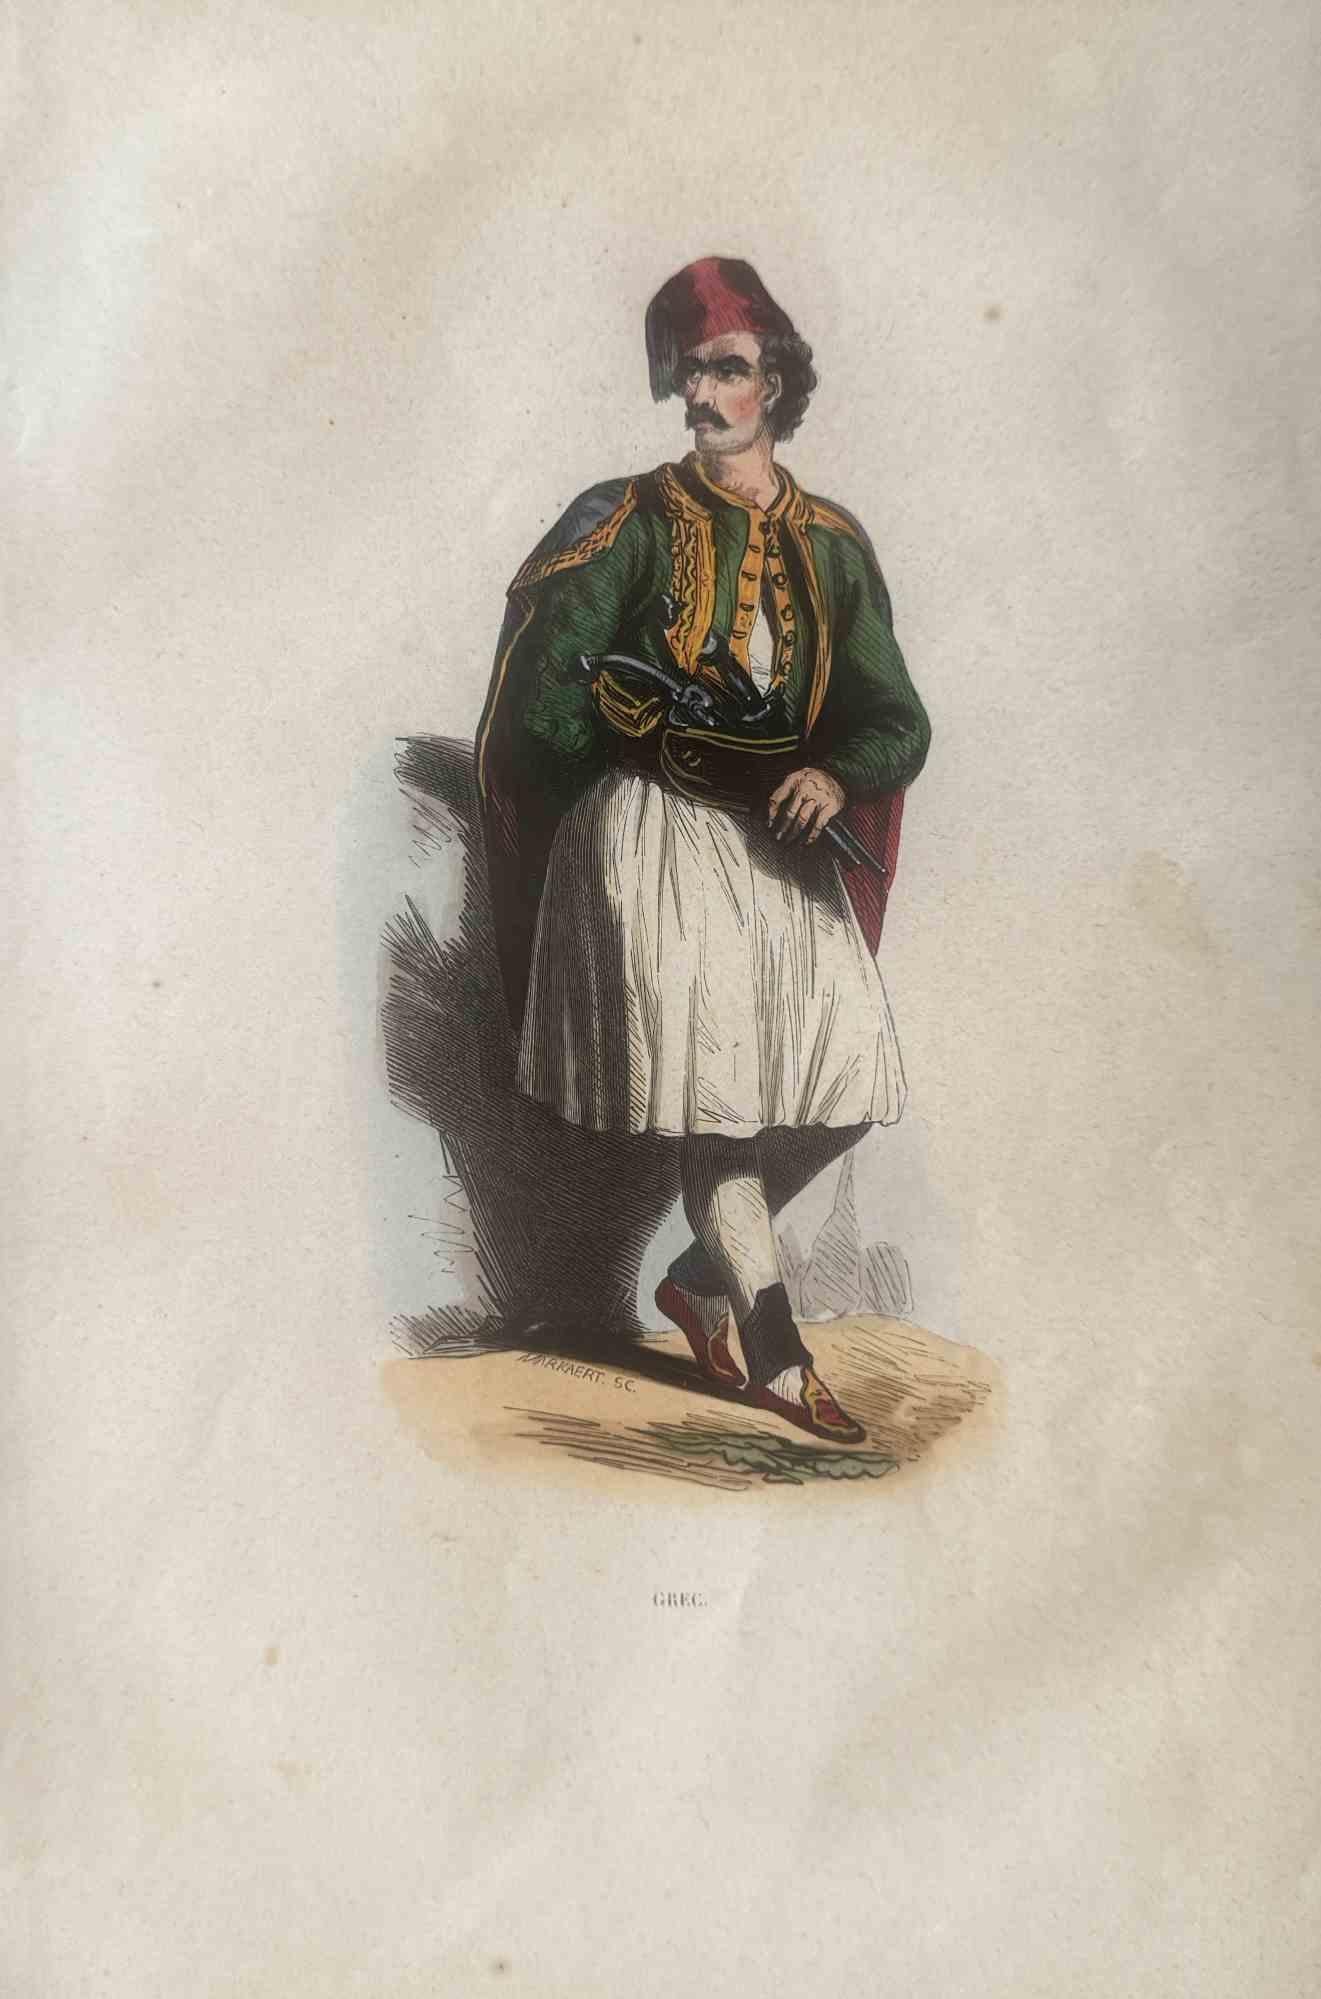 Various Artists Figurative Print - Uses and Customs - Greek Man - Lithograph - 1862